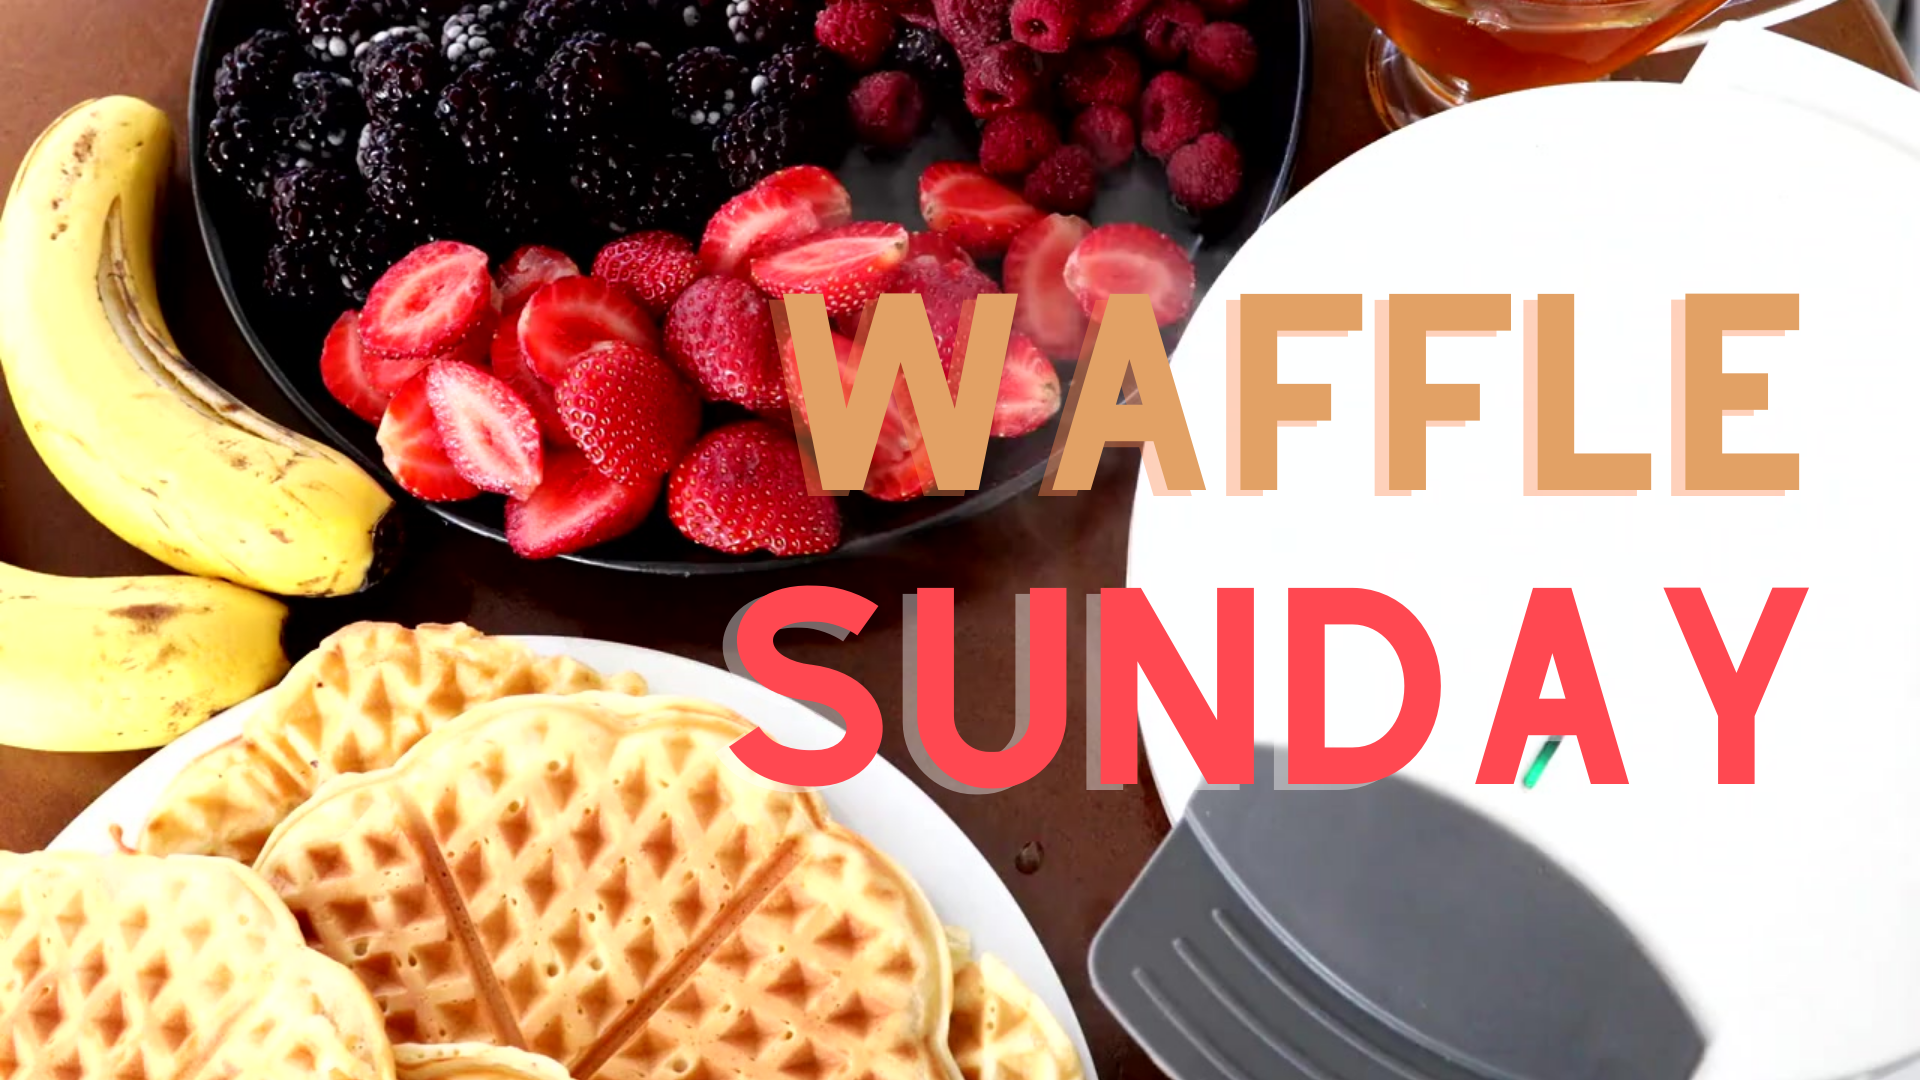 waffle iron surrounded by plate of waffles, bananas, and a plate of strawberries and other berries